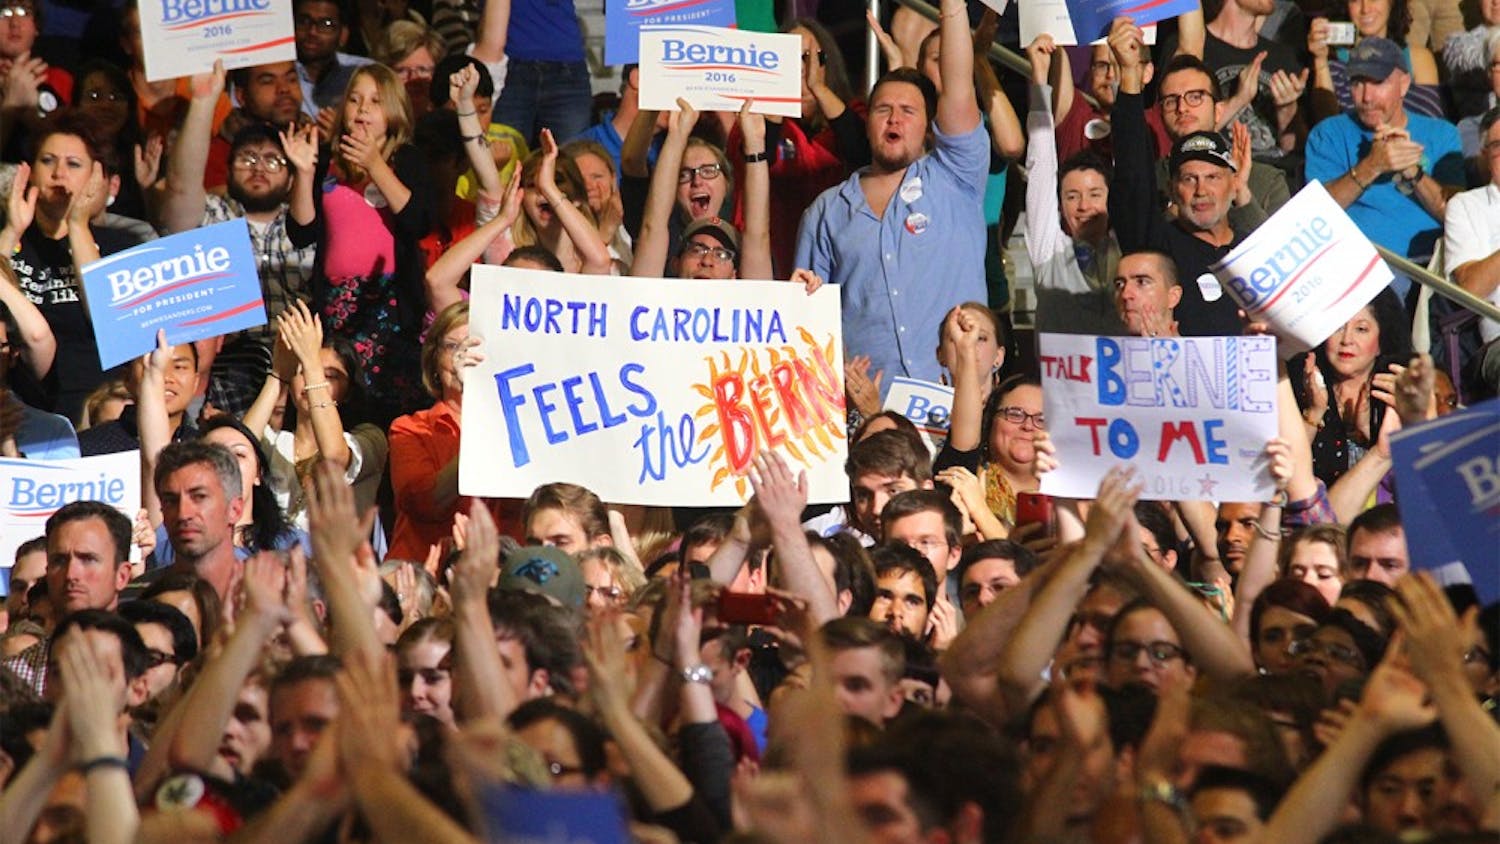 Supporters of presidential candidate Bernie Sanders attend a rally on Sept. 13, 2015 in Greensboro.